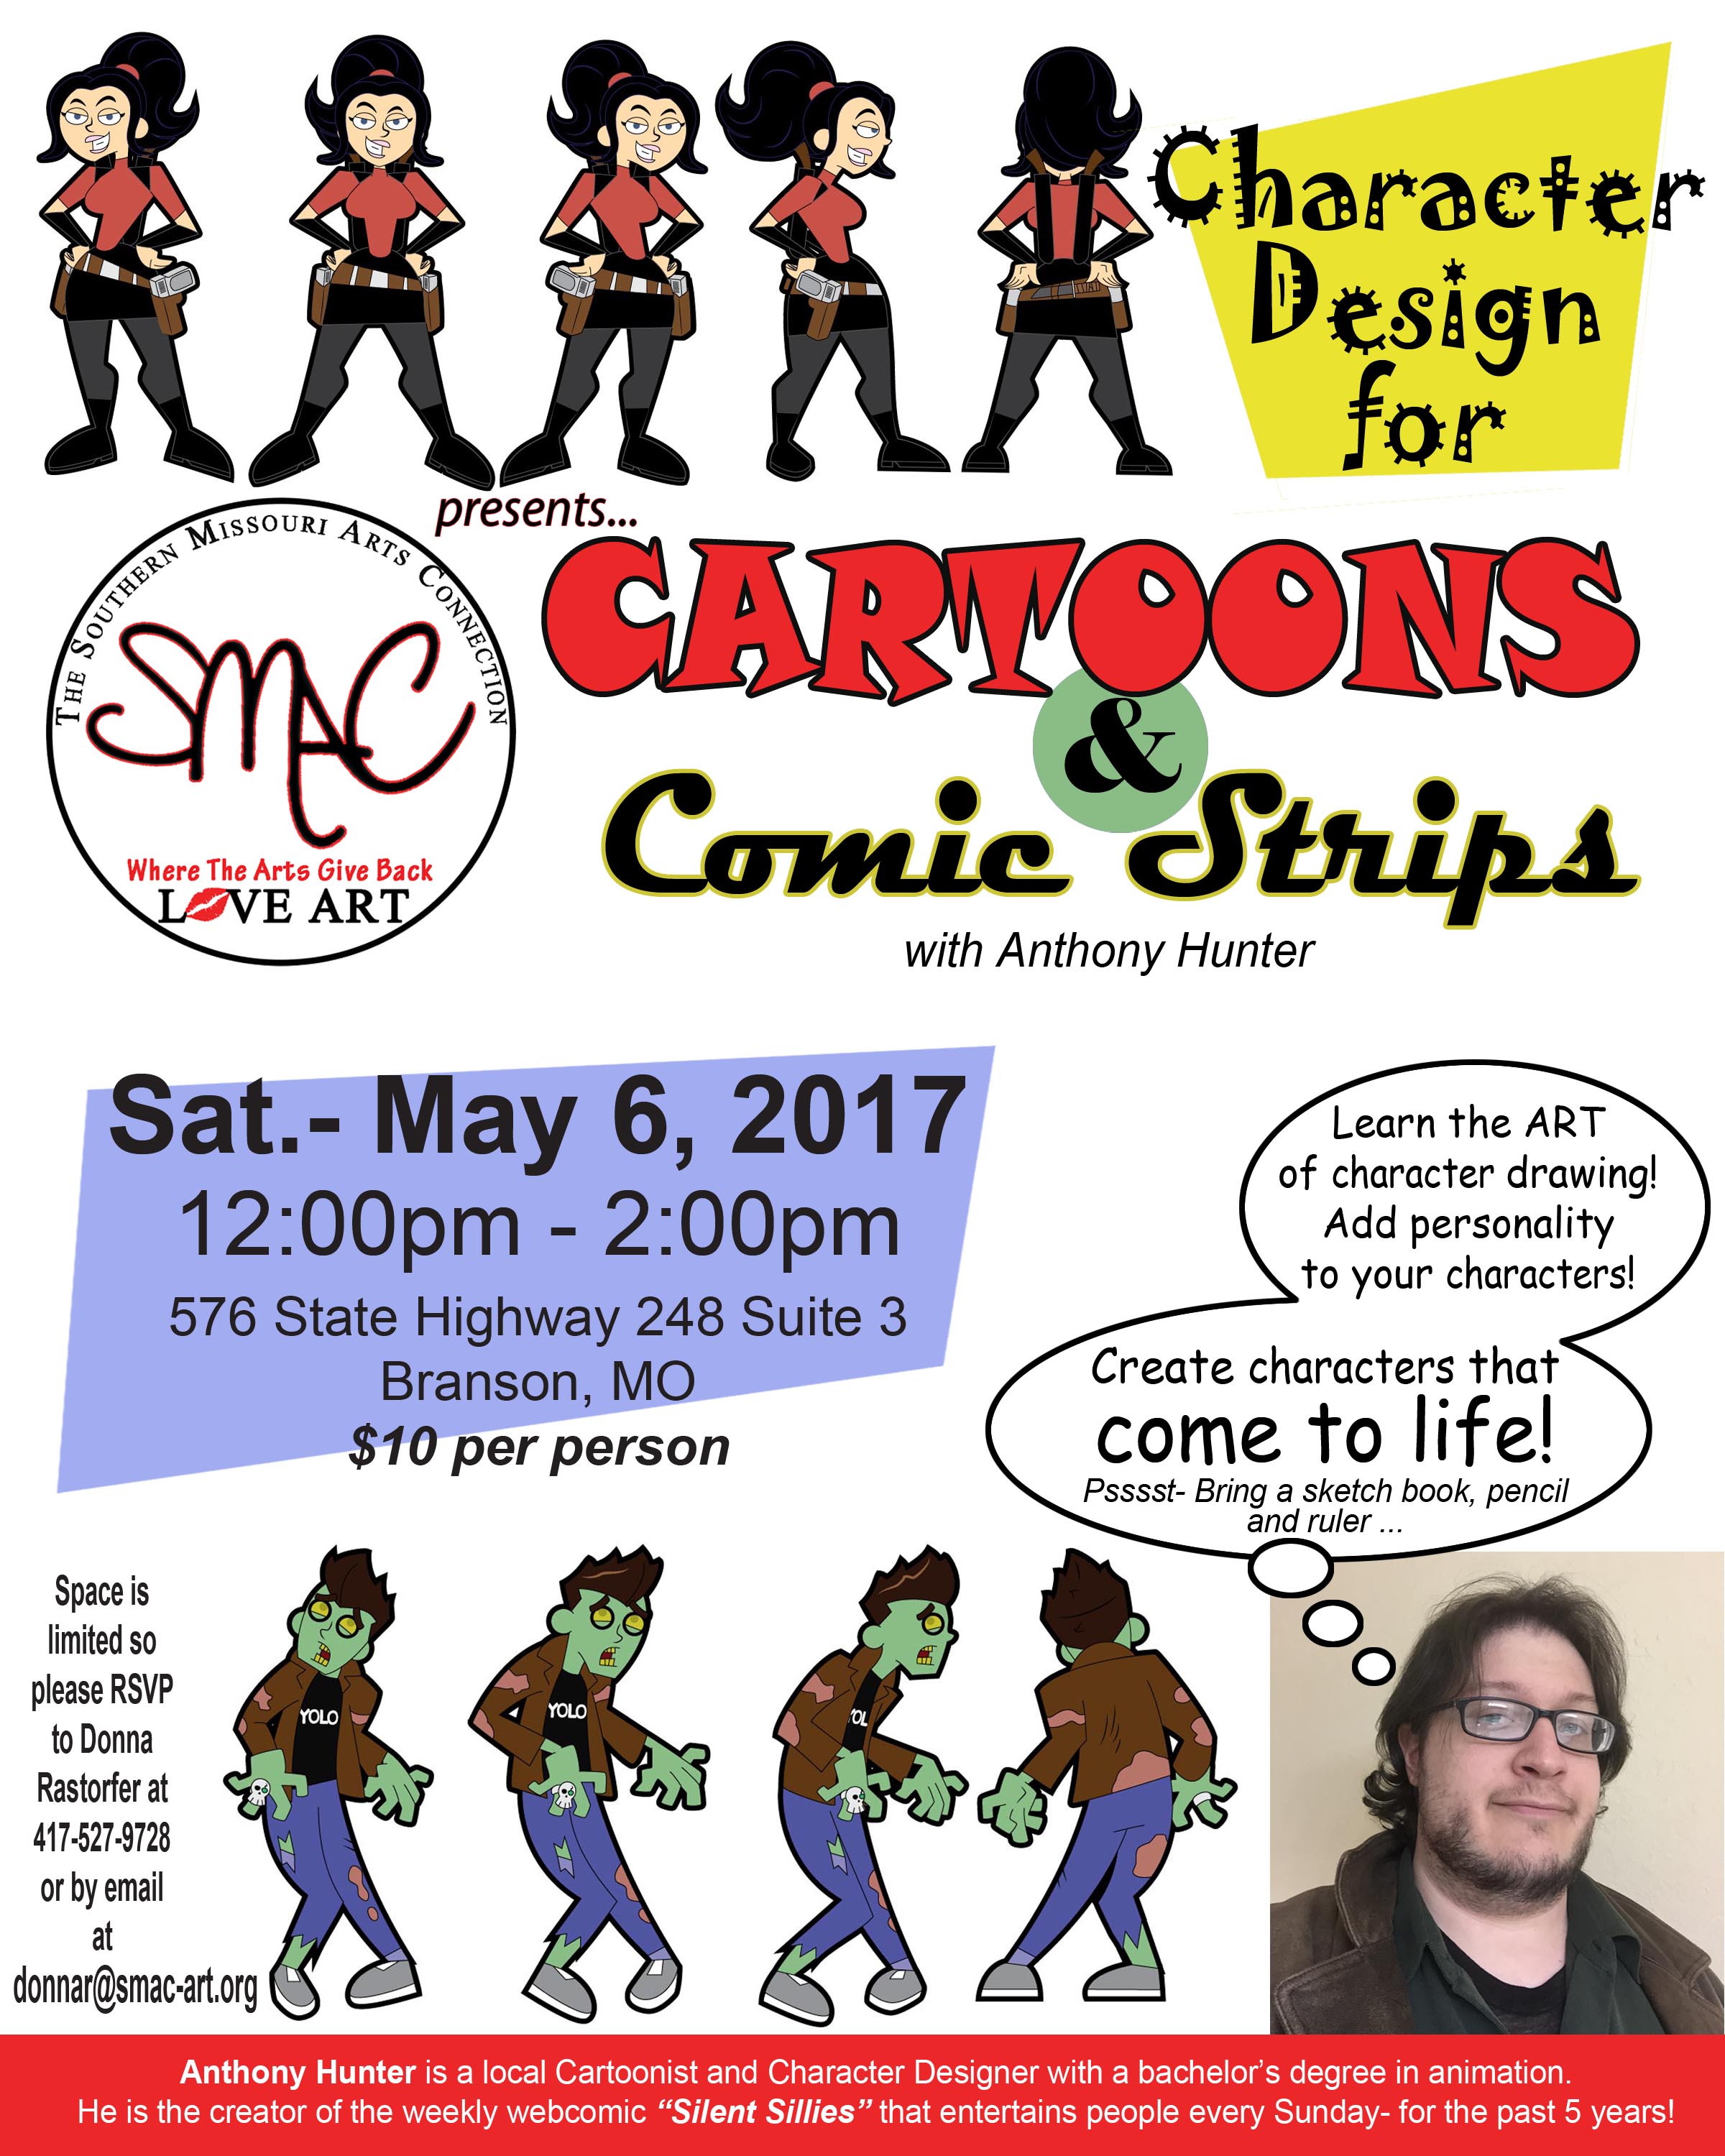 SMAC Offers Character Design for Cartoons and Comic Strips Workshop as a part of Community Arts Enrichment series